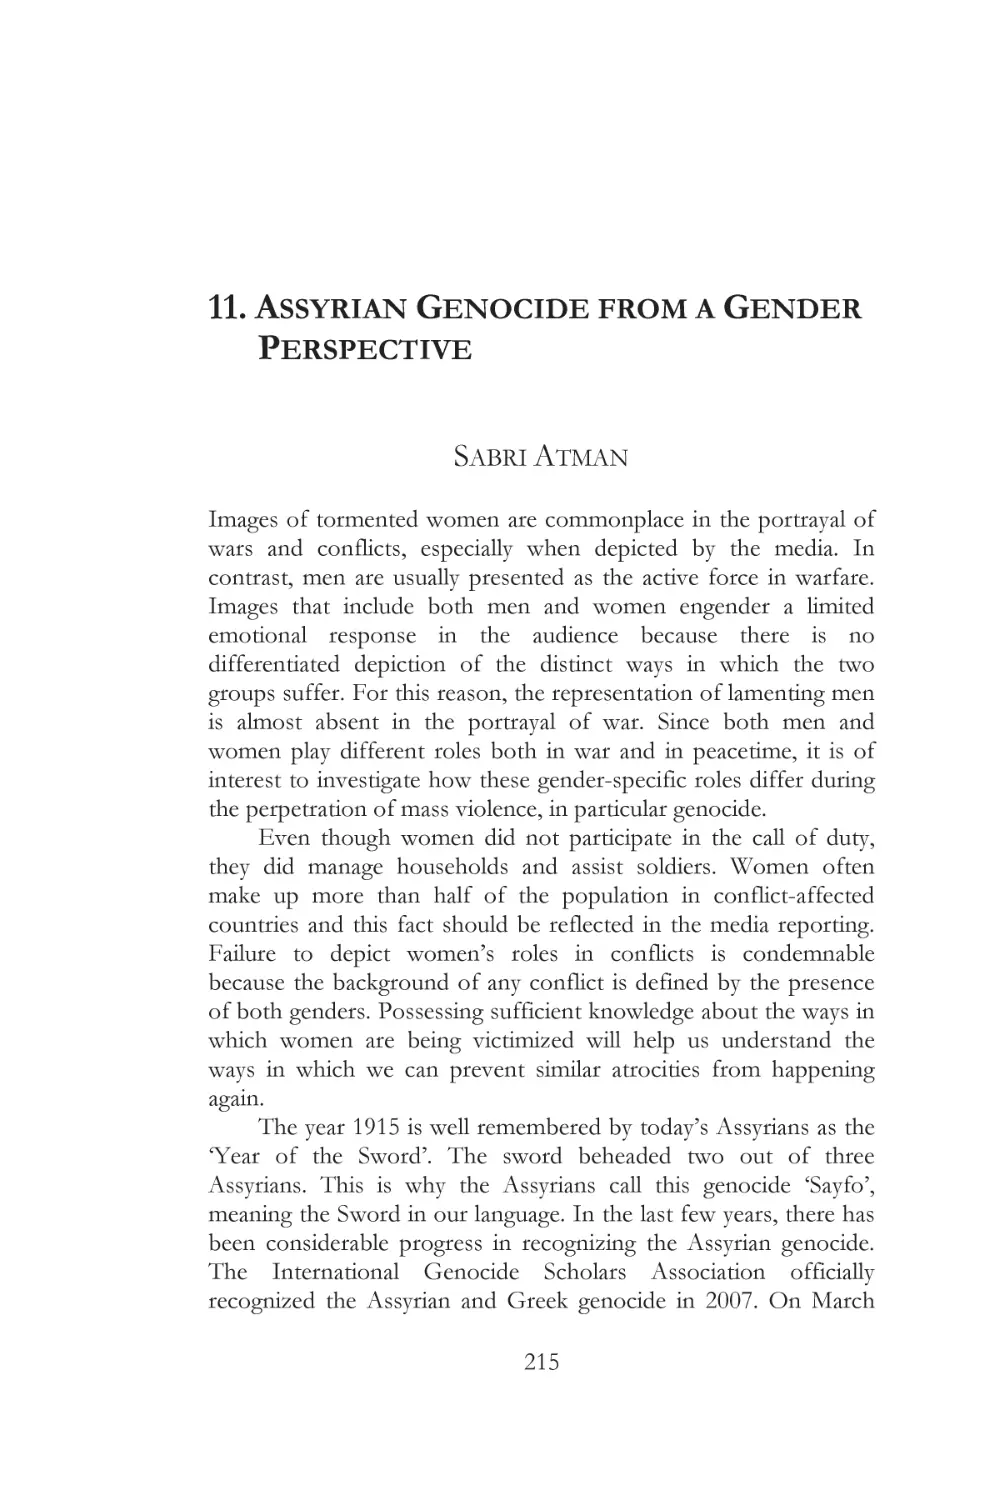 11. ASSYRIAN GENOCIDE FROM A GENDER PERSPECTIVE